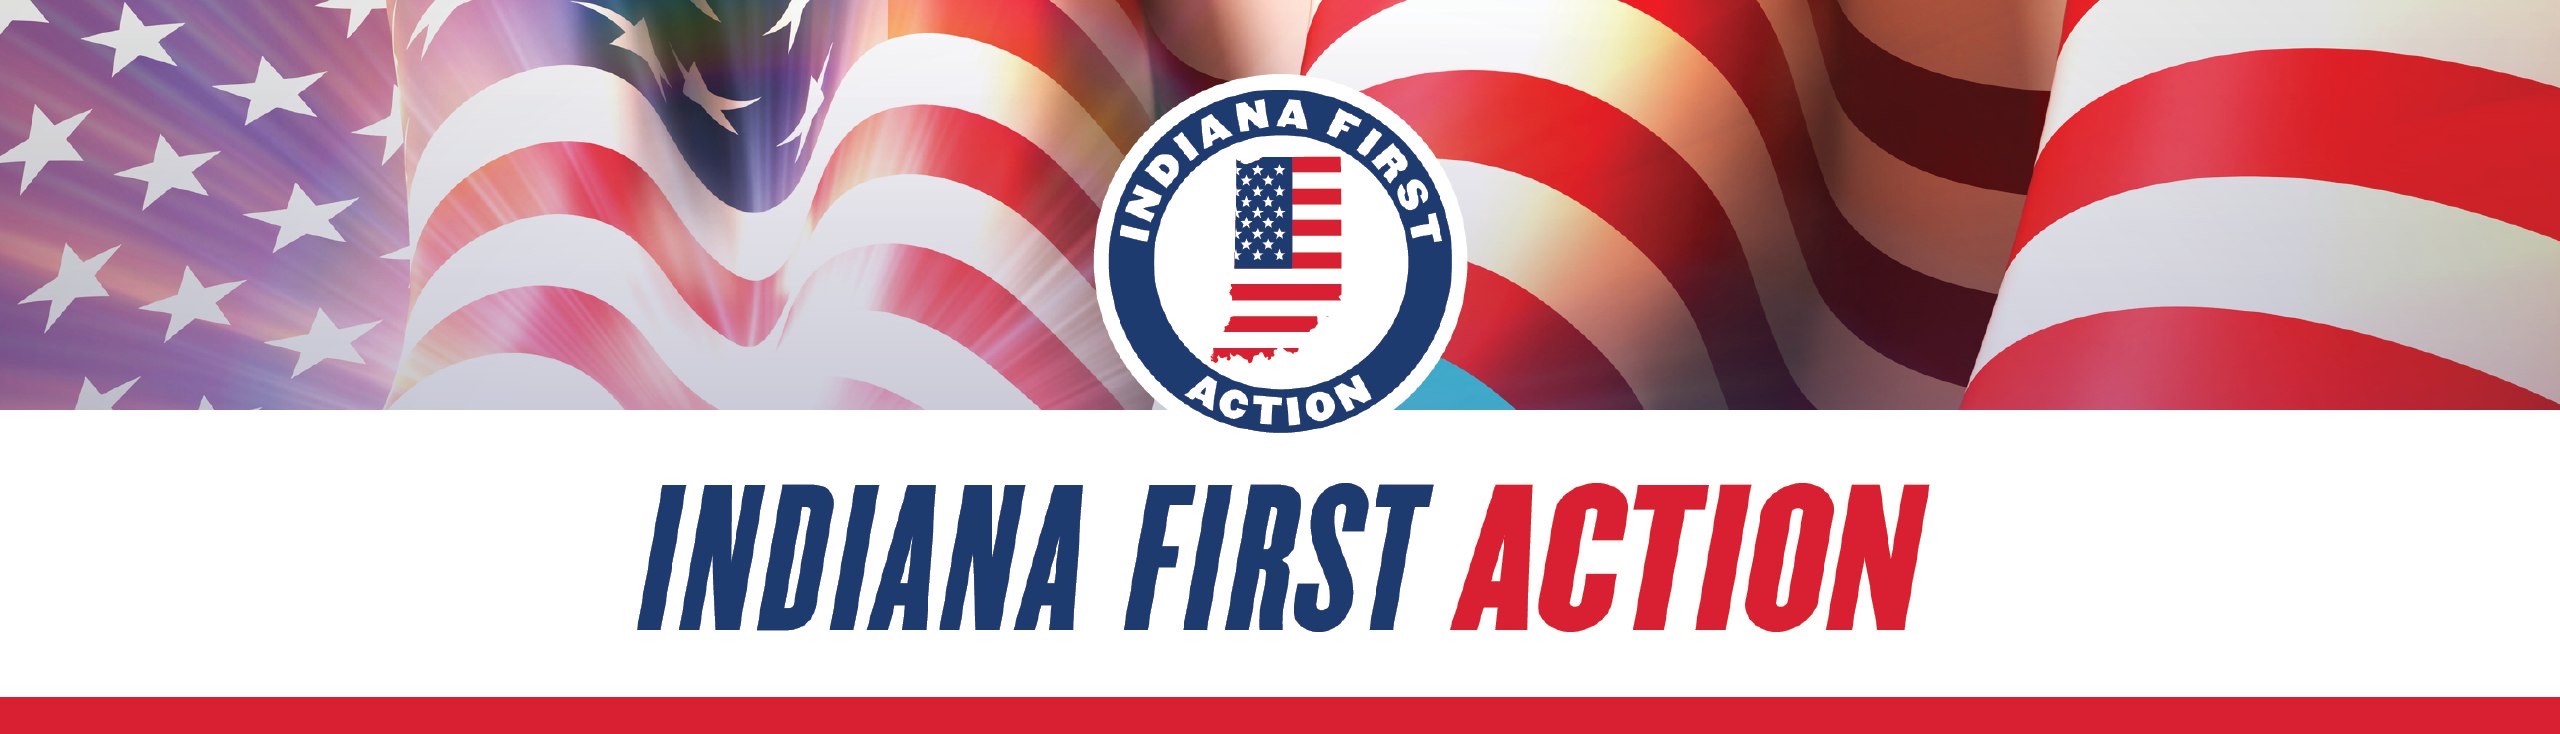 IFA Call to Action - Indiana First Action